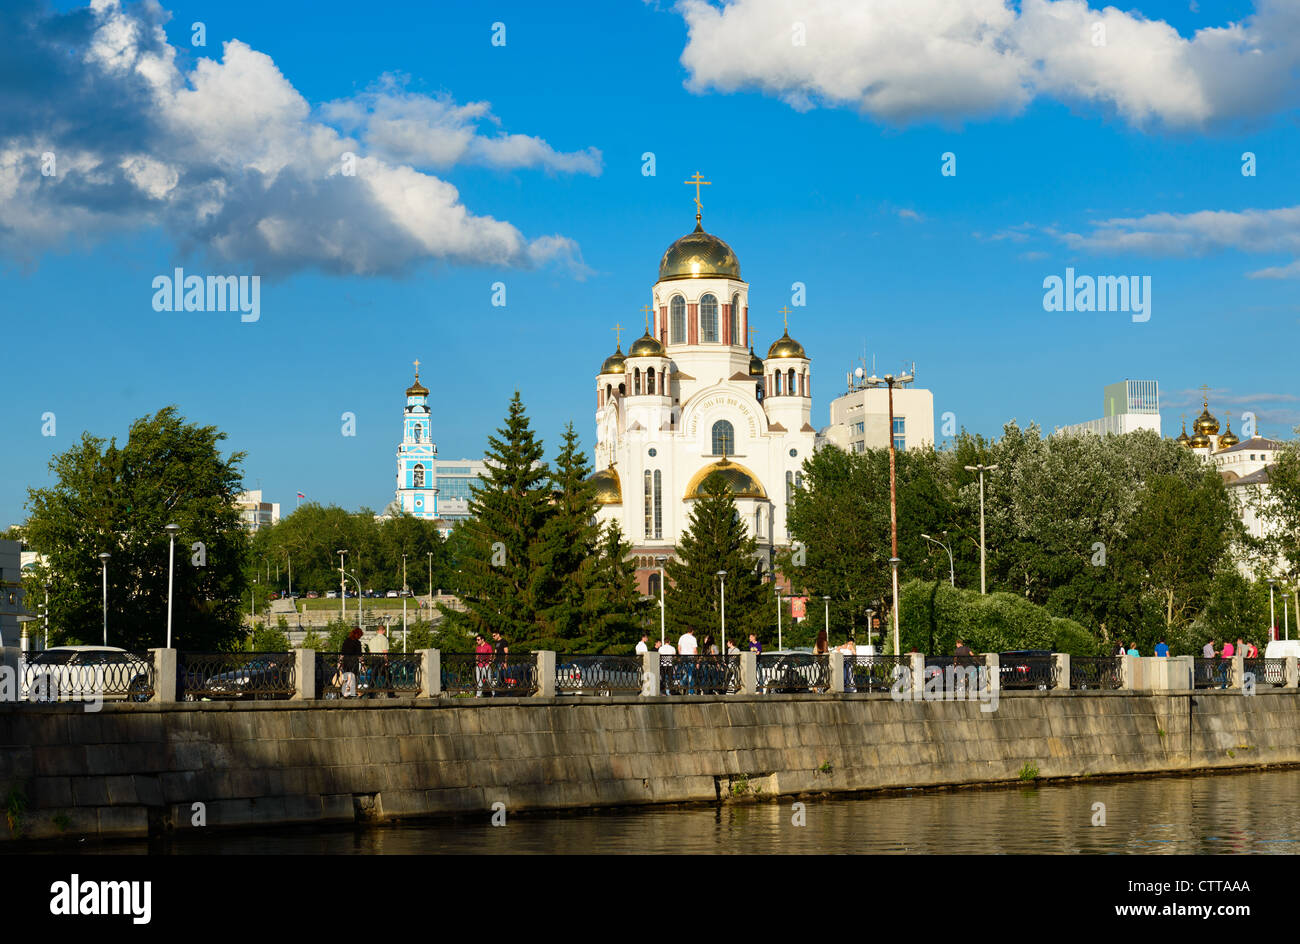 Temple-on Blood, Yekaterinburg, Russia Stock Photo